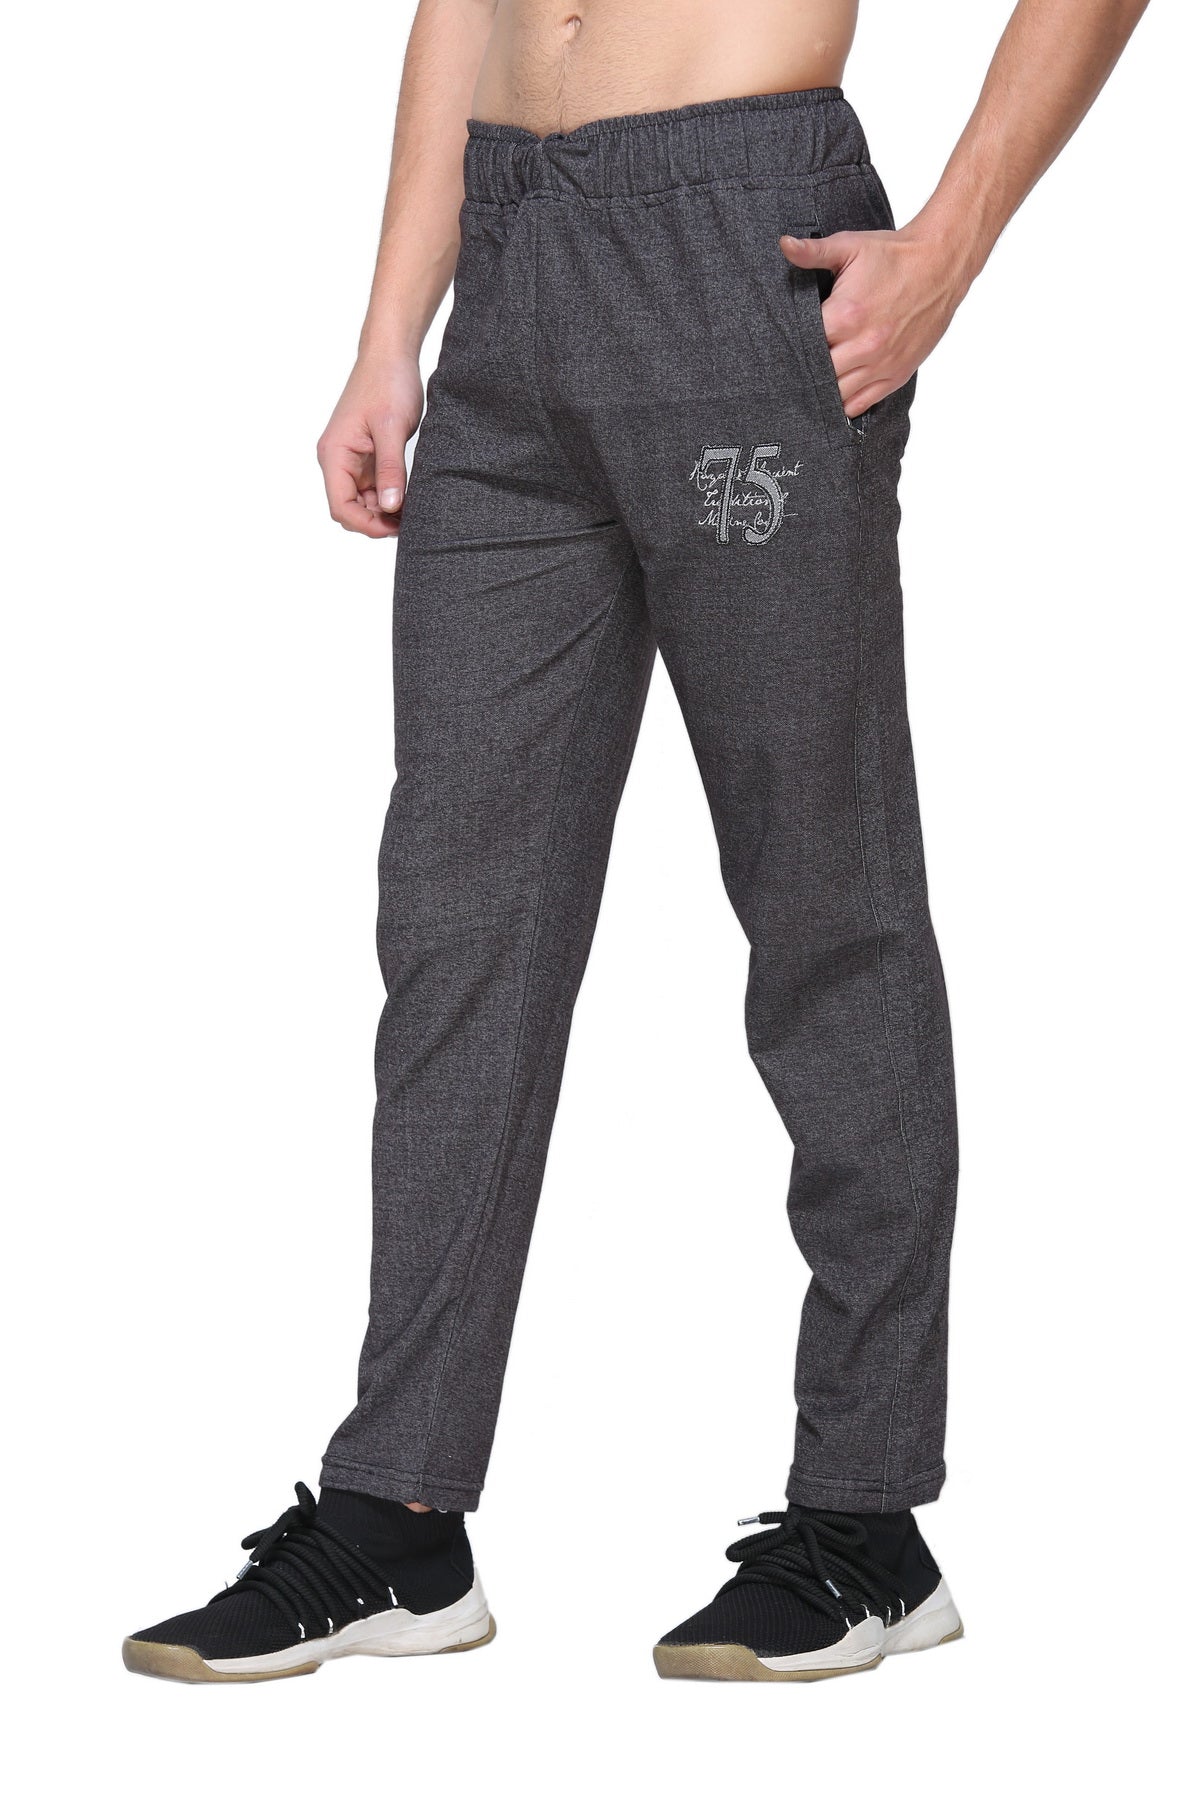 Stylish Black Cotton Jinxer Regular Fit Trackpants for Men online in India